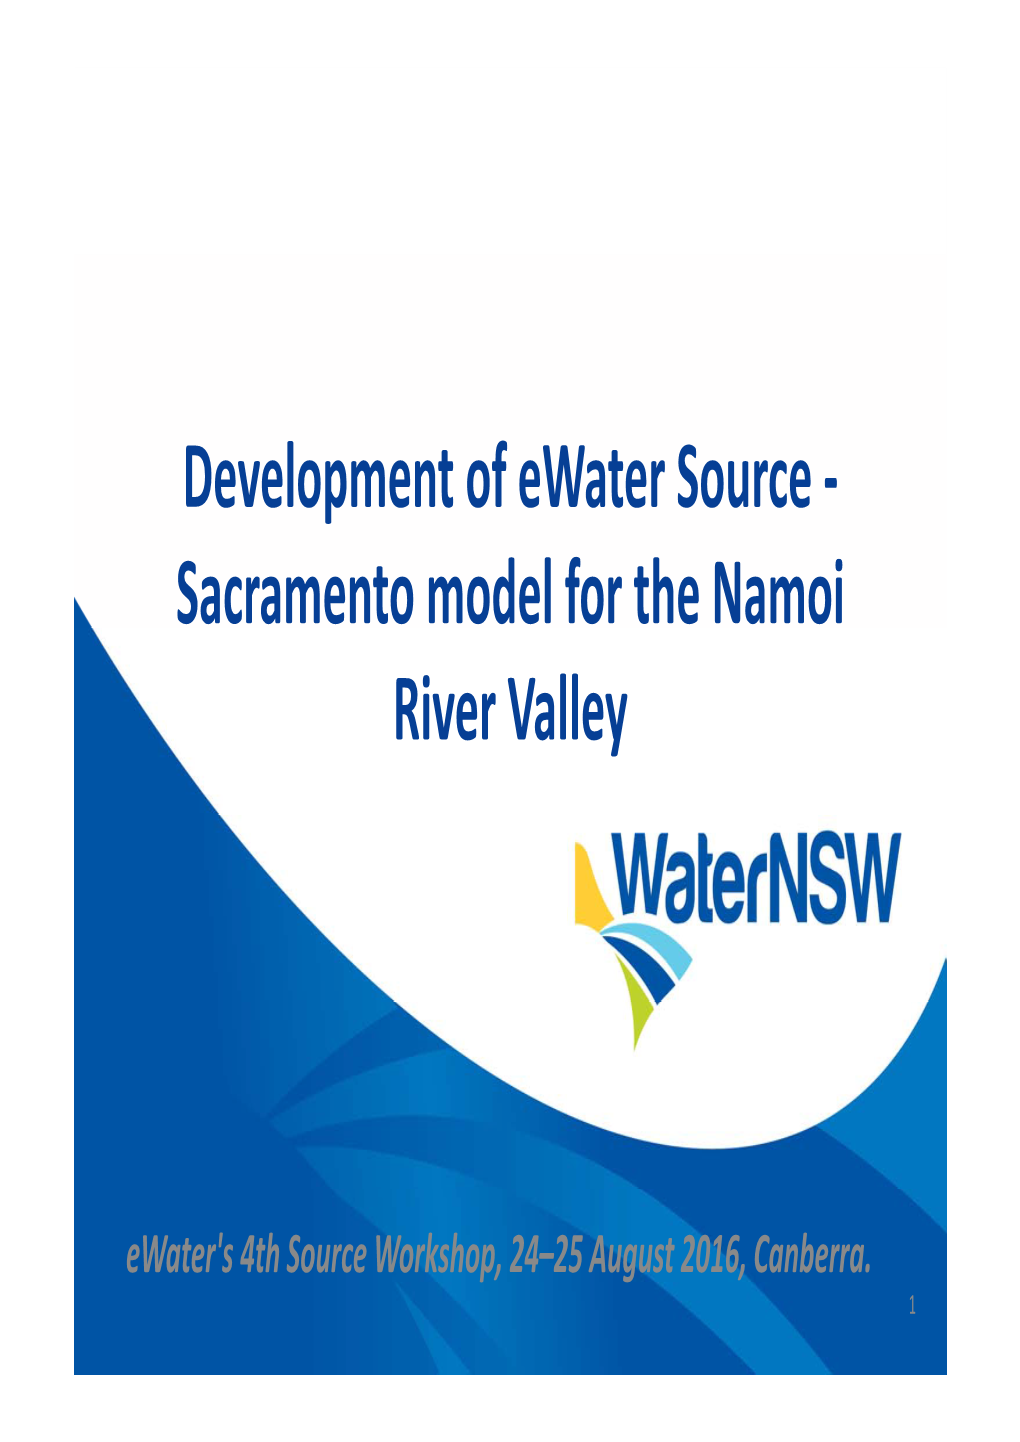 Development of Ewater Source ‐ Sacramento Model for the Namoi River Valley